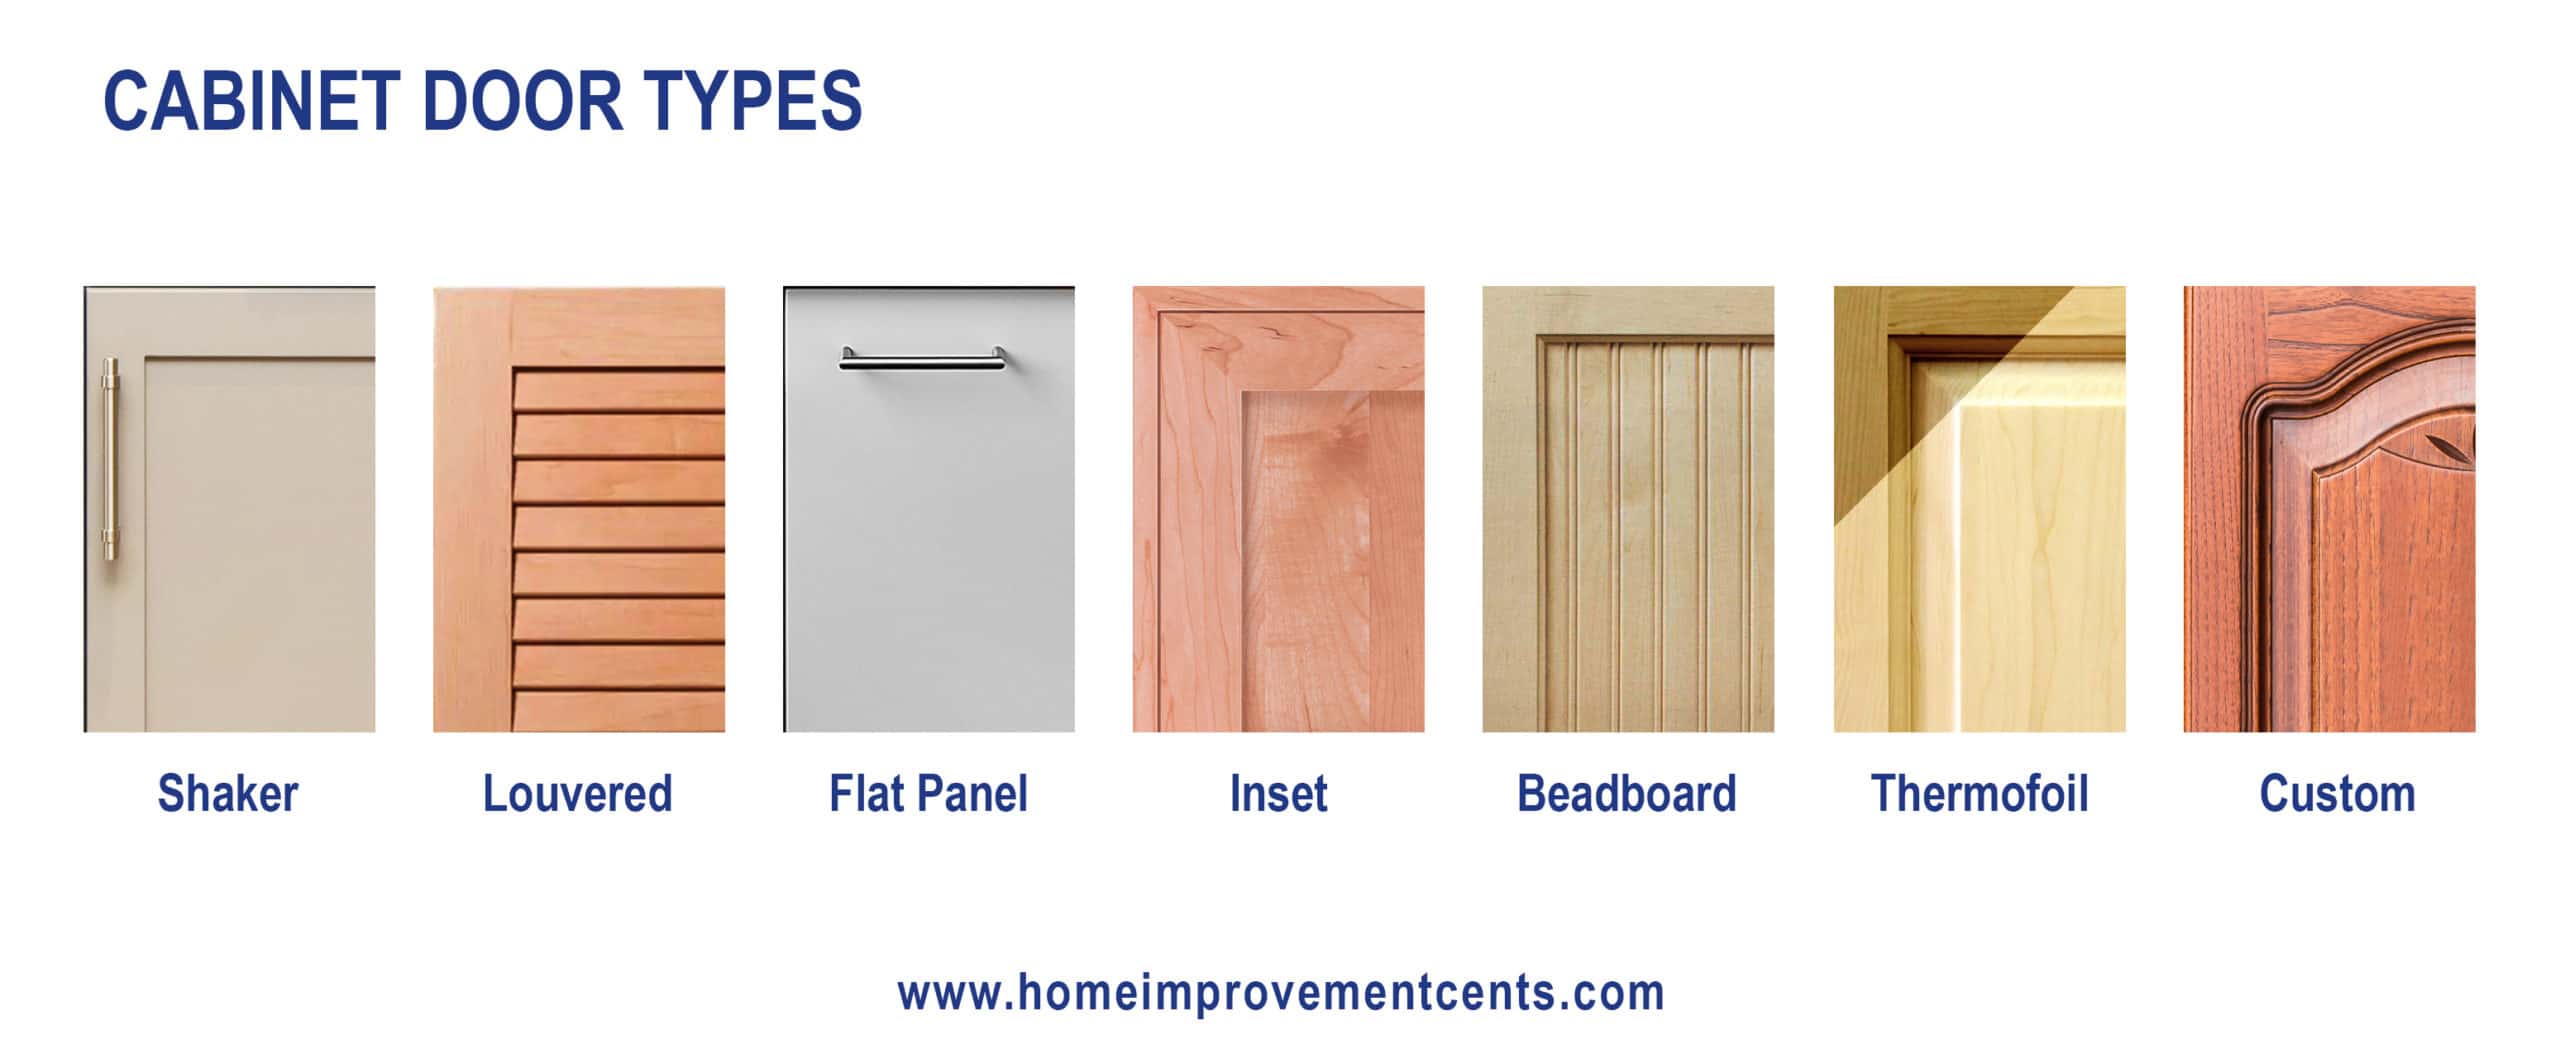 Types Of Cabinet Doors Commonly Used In Kitchens